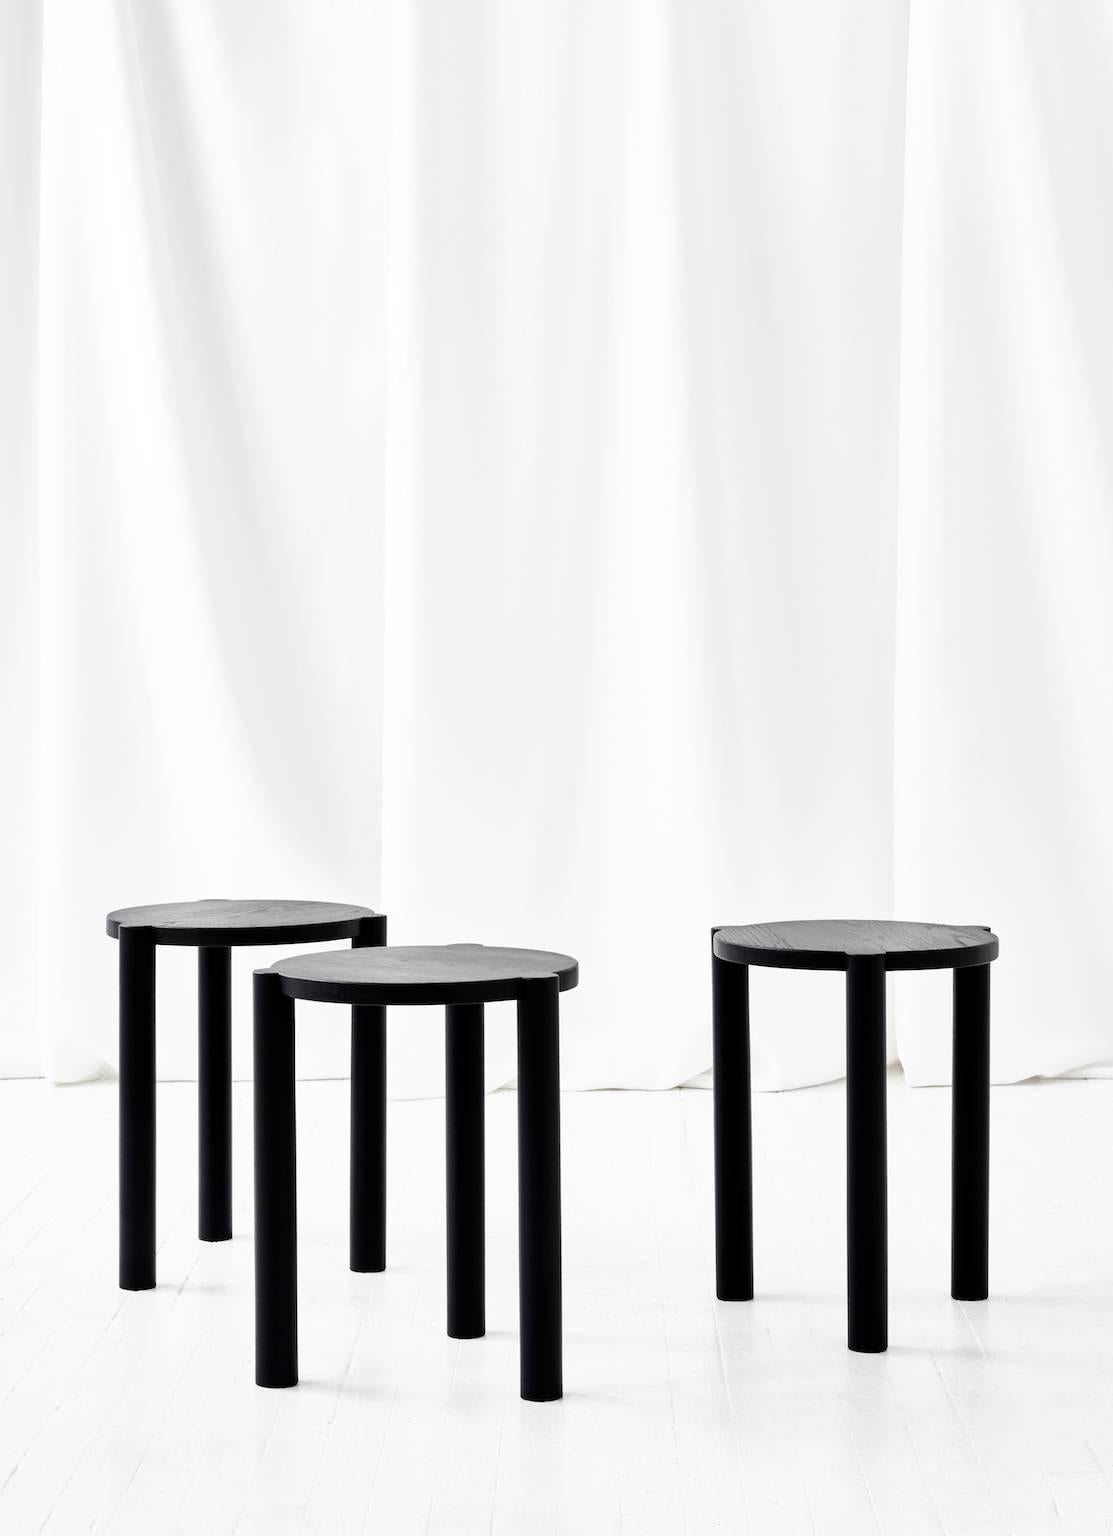 The WC3 stool by ASH NYC is a playful stool. The hand-turned legs join seamlessly with the seat to create an elegant, handcrafted joint that defies gravity. 
 
An exercise in Minimalist design, the hidden joints allow for the stool to function